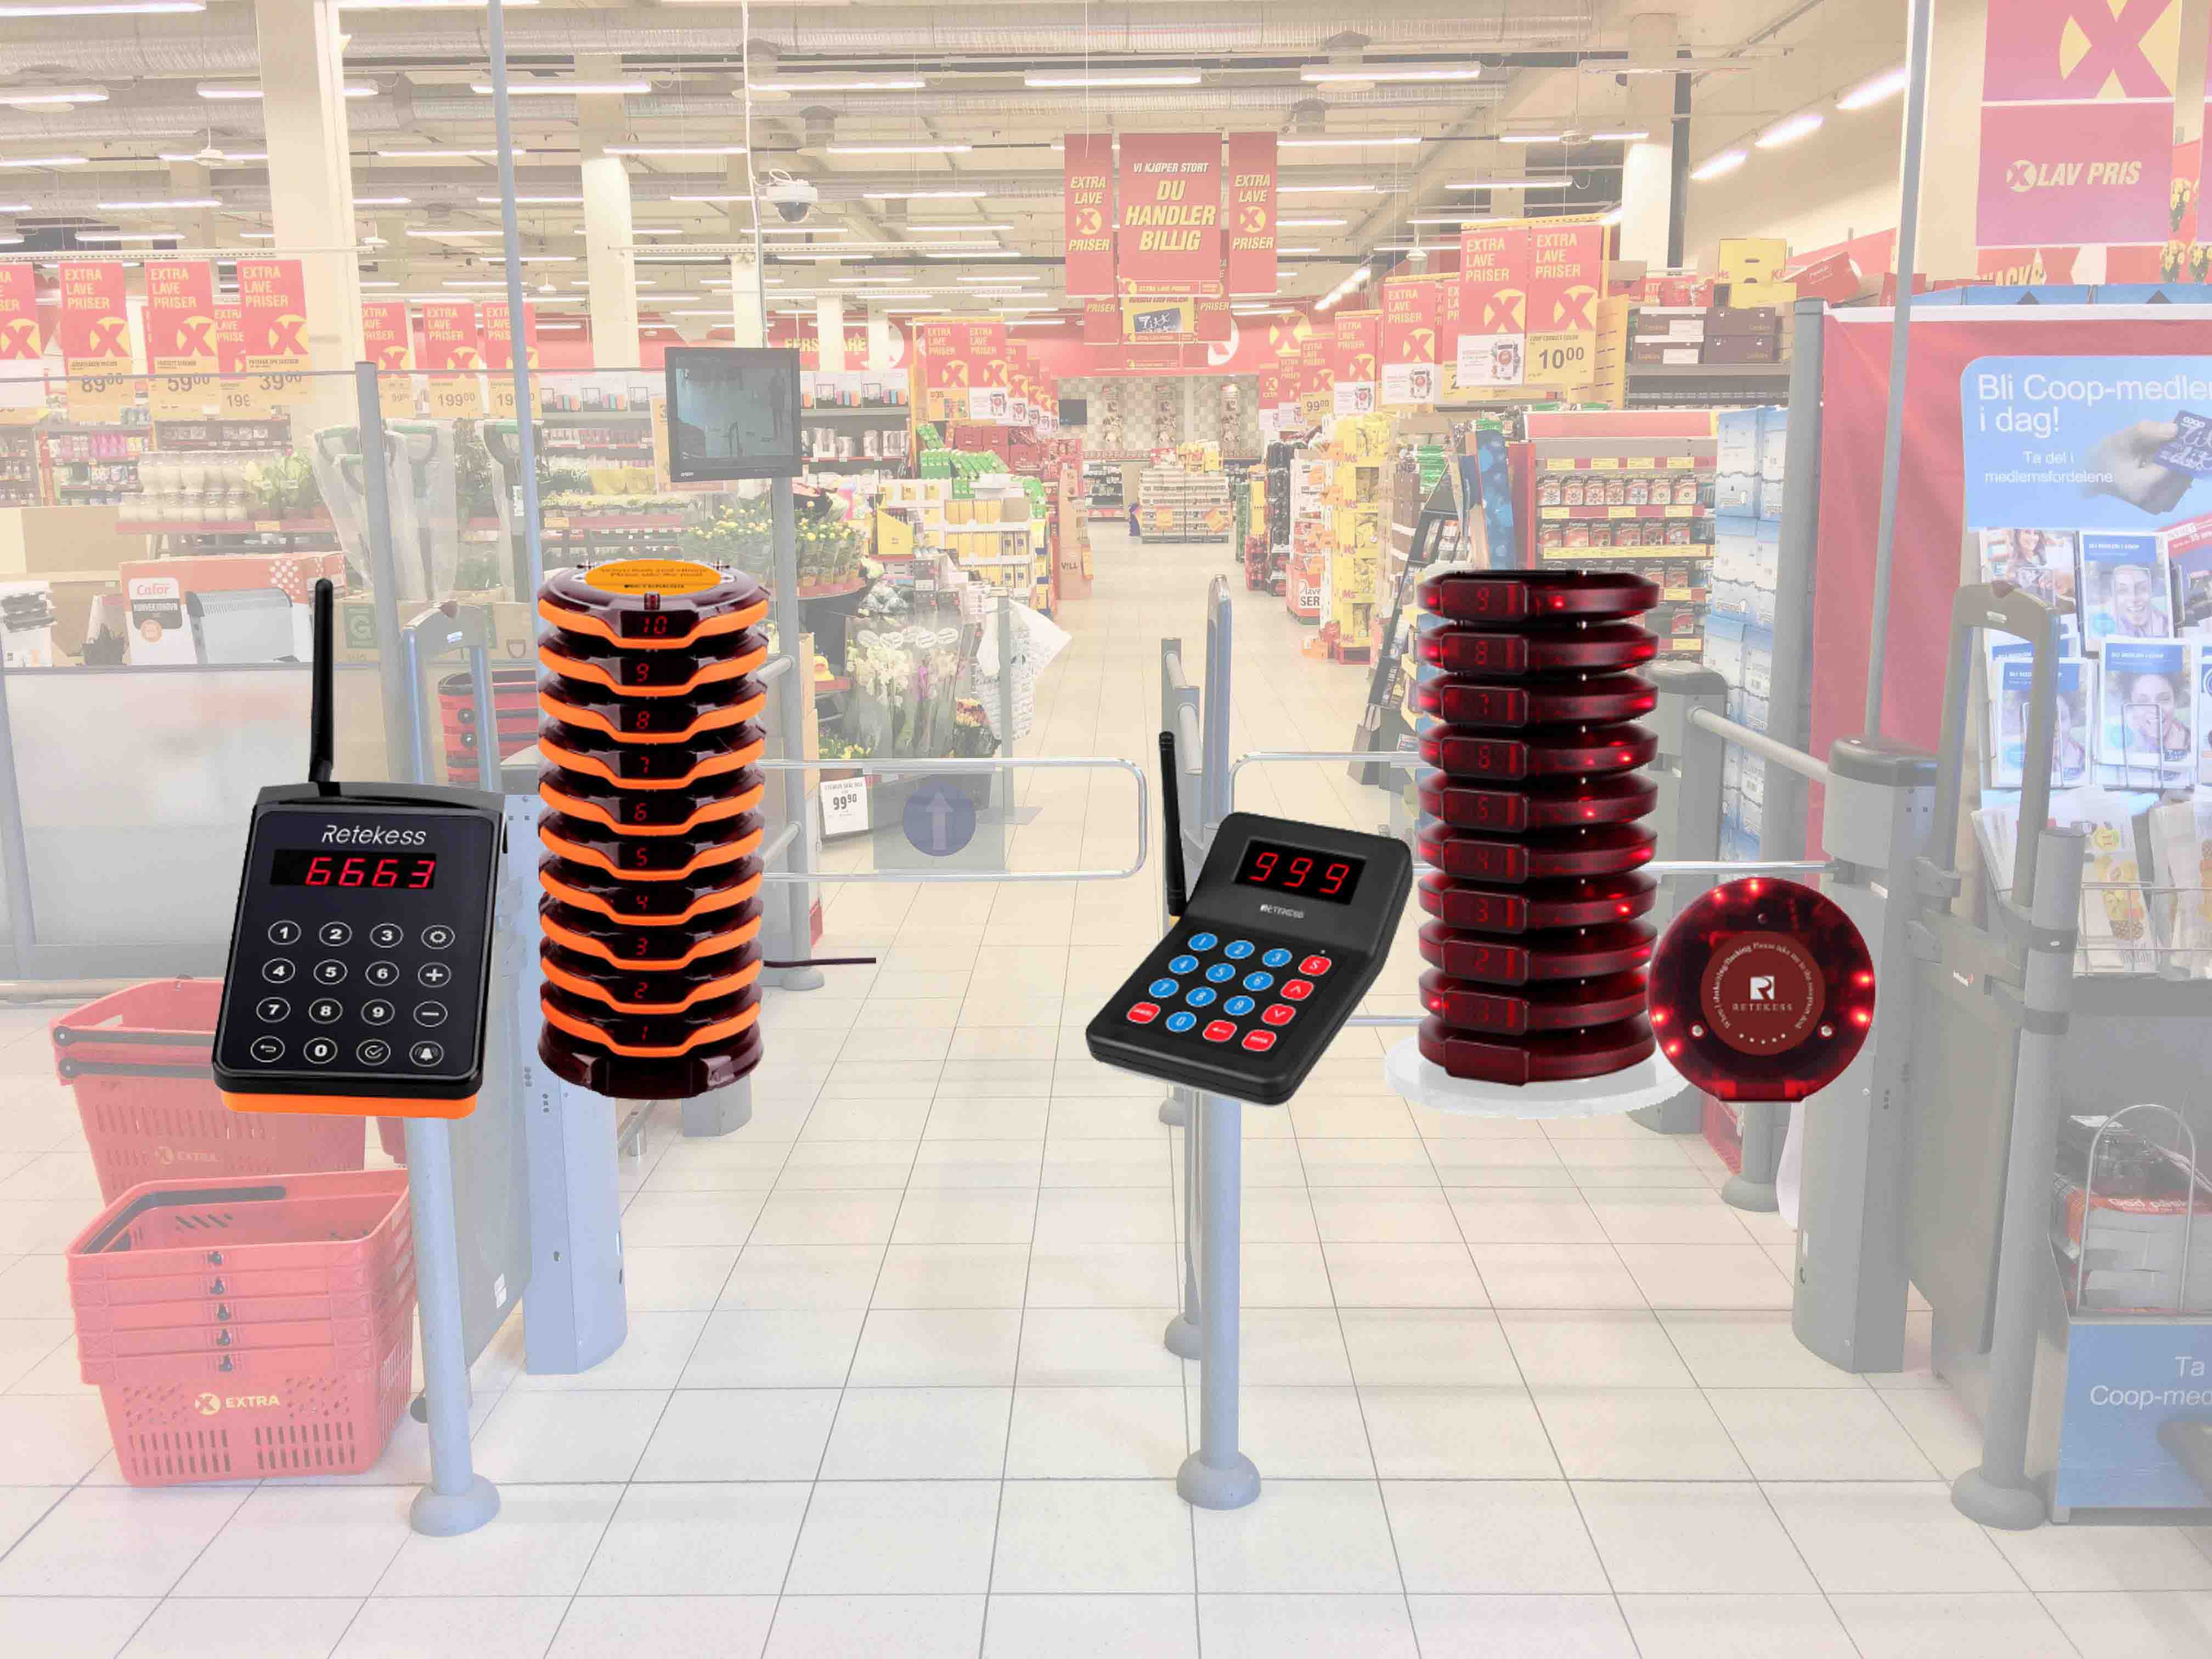 How to Use Wireless Paging System for Supermarket?